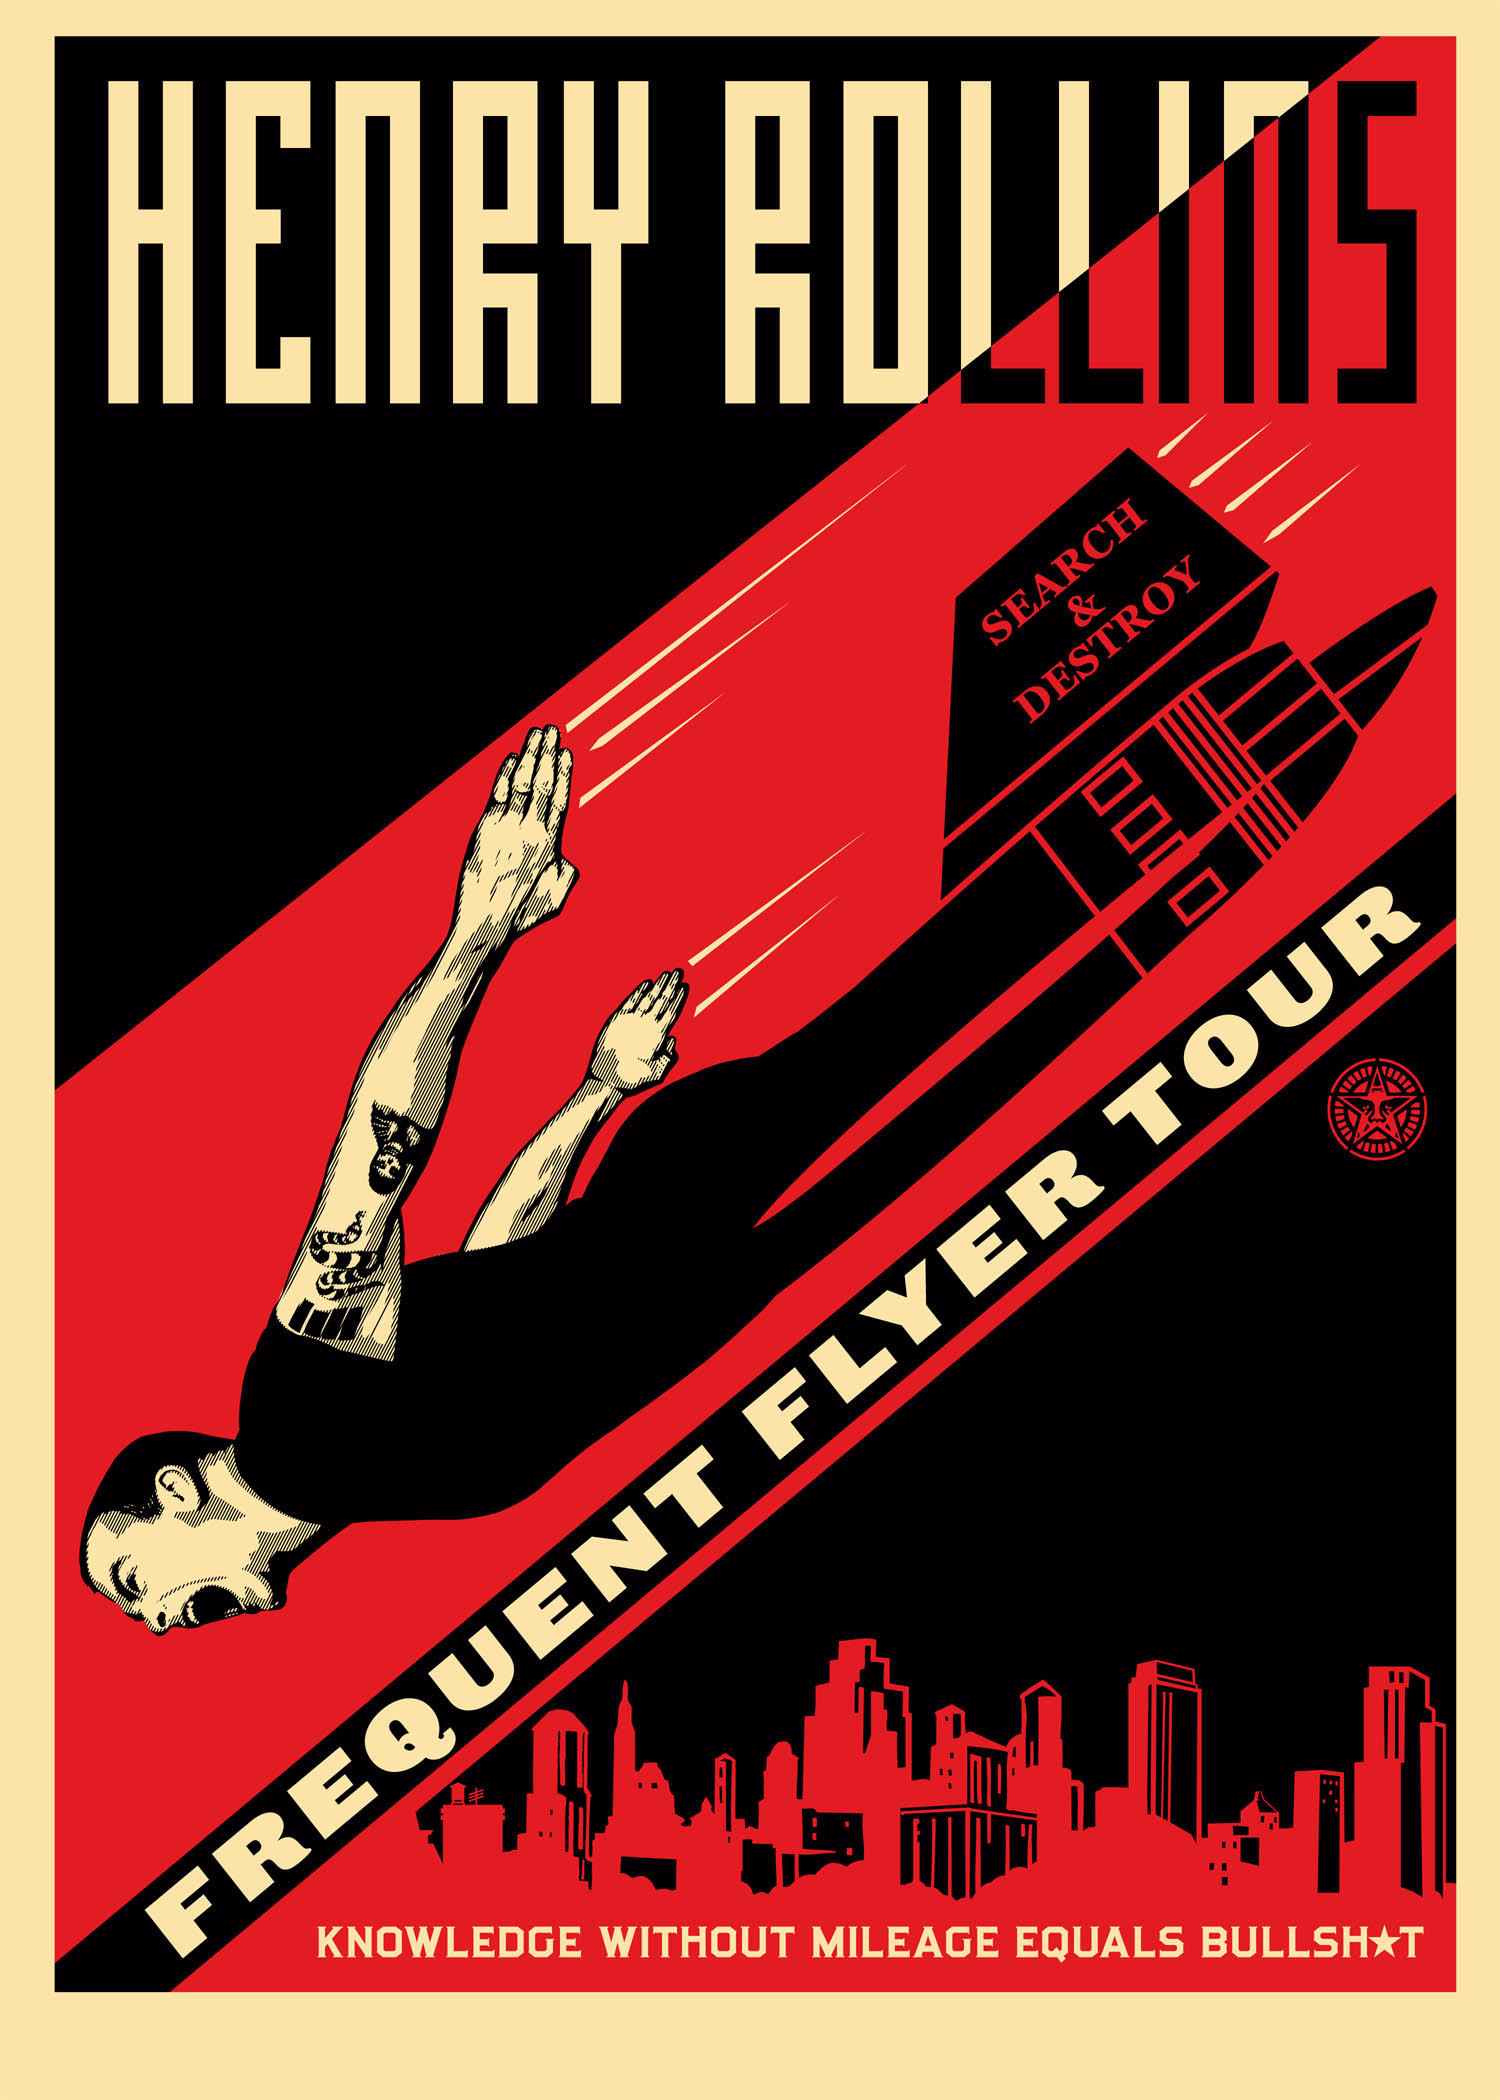 Henry+Rollins+Frequent+Flyer+Tour+272736Henry_Rollins_2010_tour-2.jpg